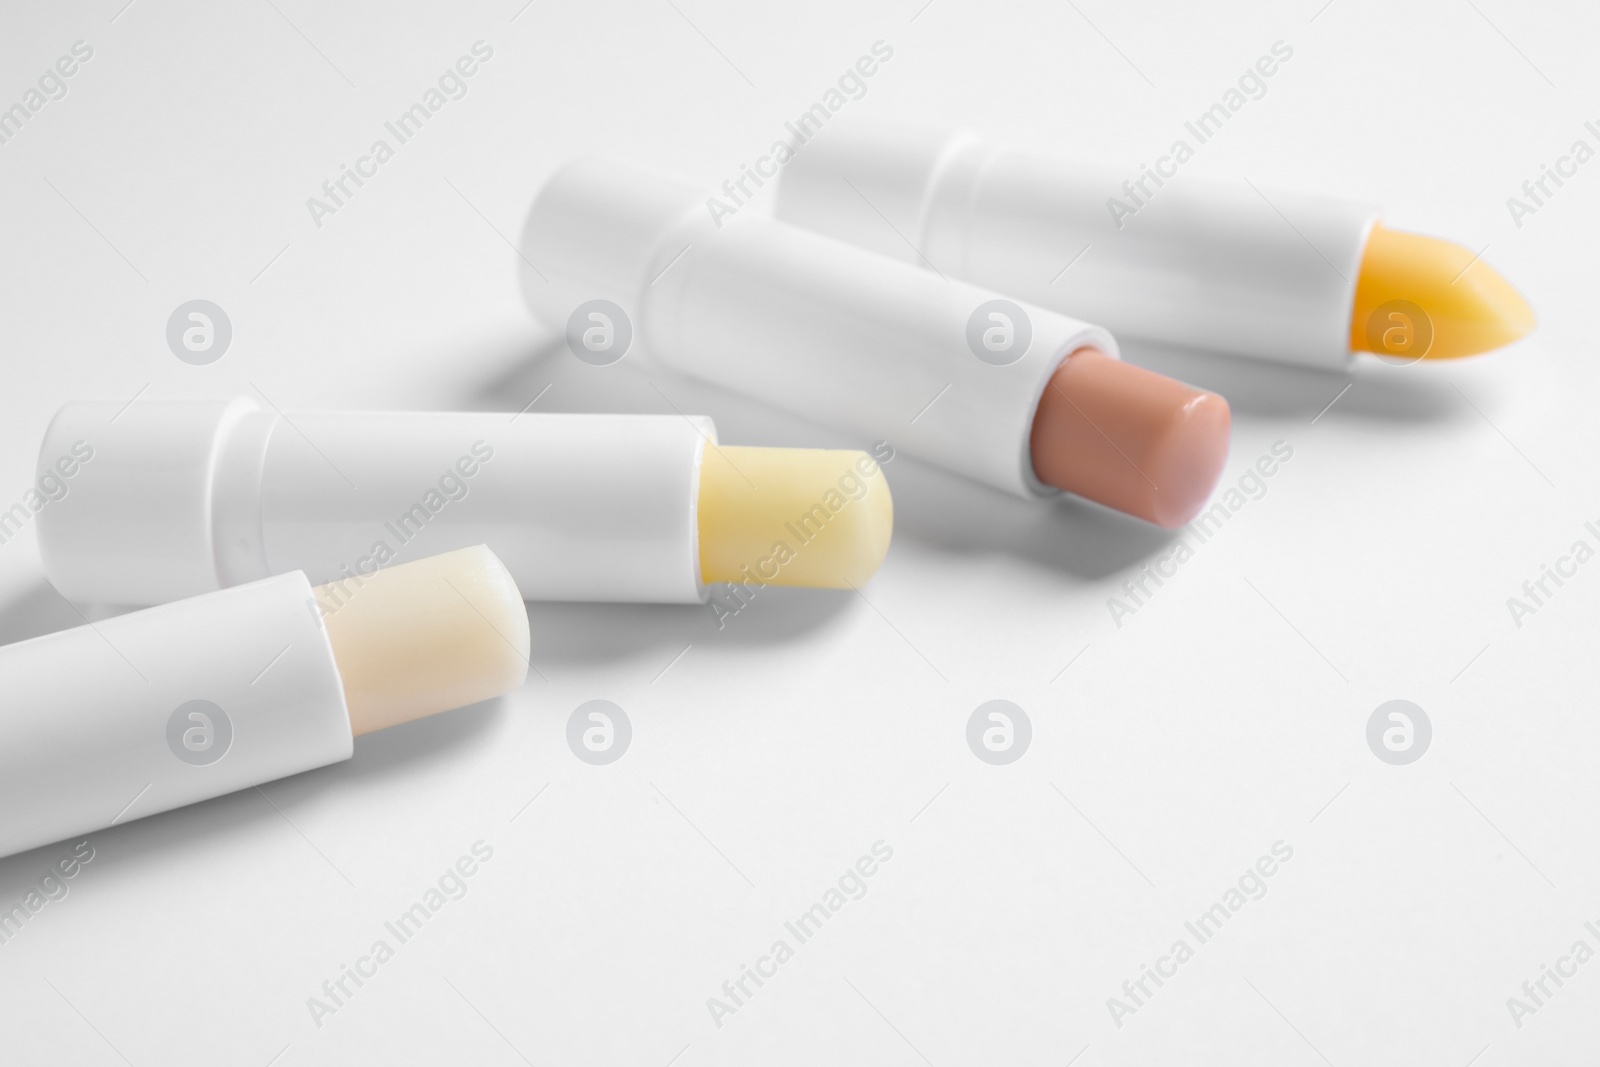 Photo of Different open hygienic lipsticks on white background